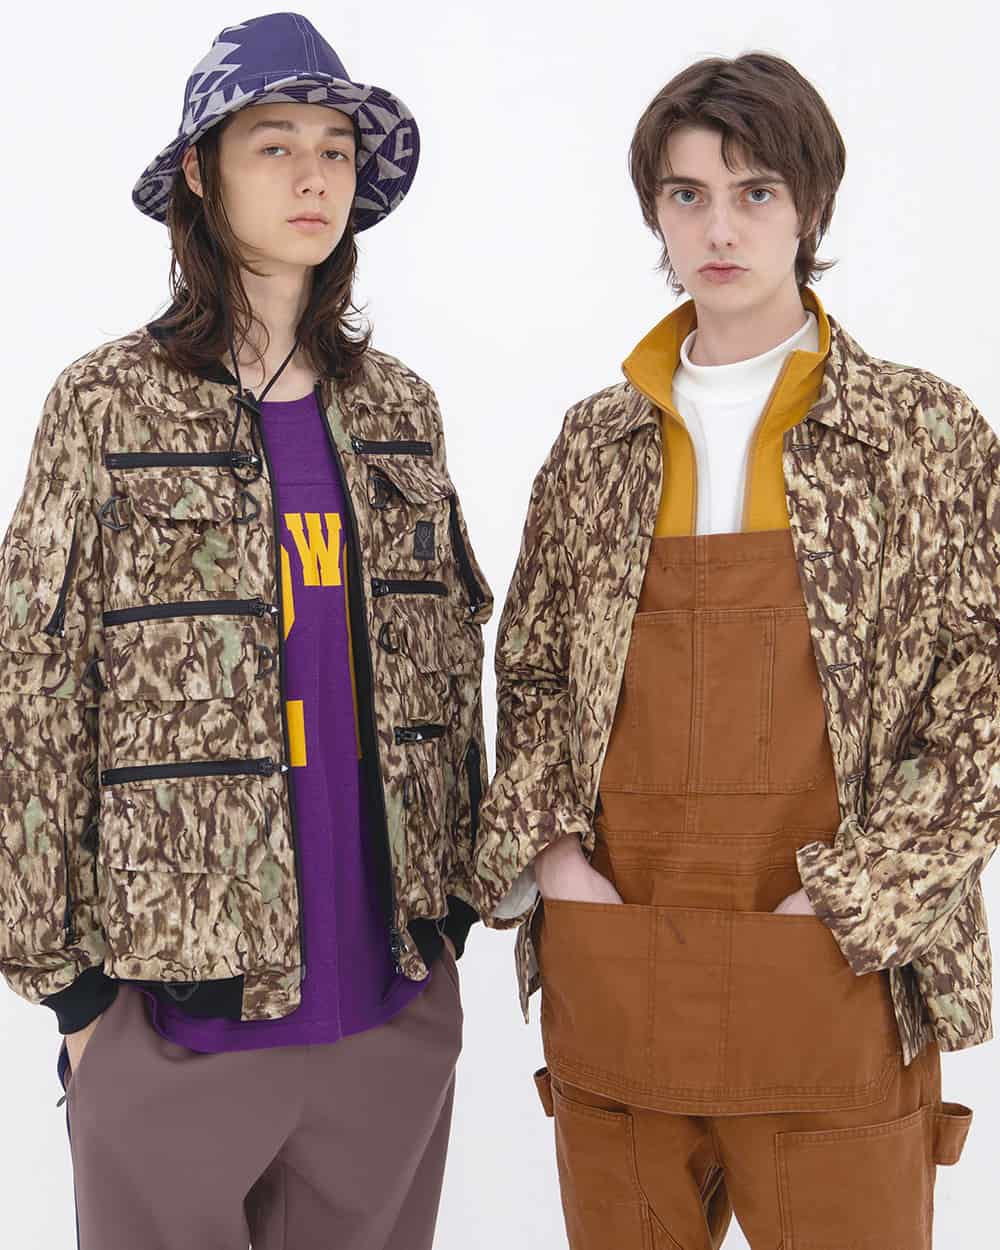 Two men wearing workwear and camo jackets by South2 West8